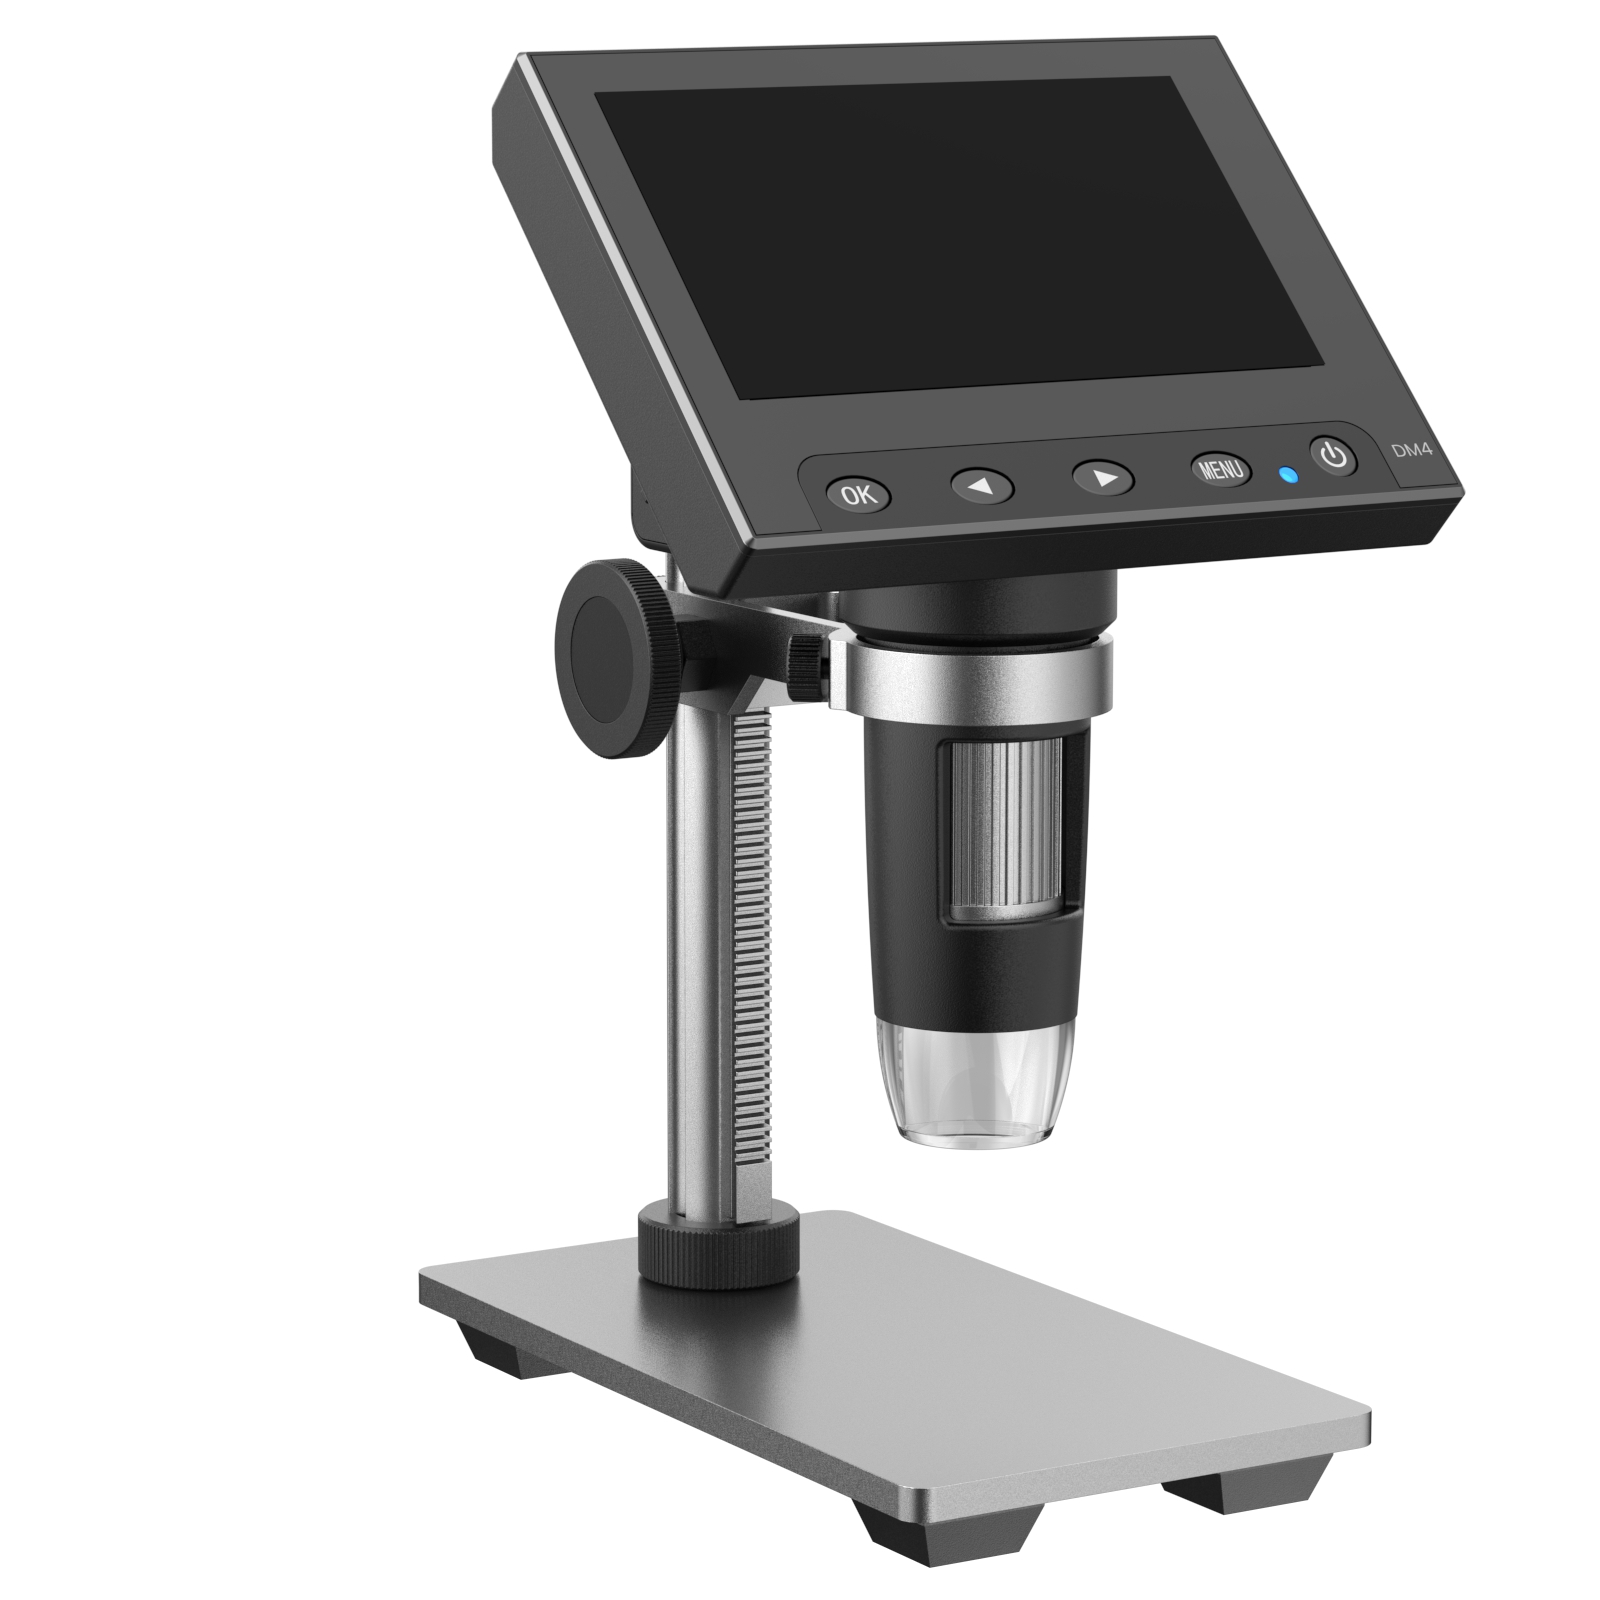 TOMLOV DM4 Coin Microscope 1000X with 4.3 Screen, 720P LCD Microscope with  Metal Stand, 8 Adjustable LED Lights, PC View for Kids Adults, Windows  Compatible, 32GB TF Card Included Black